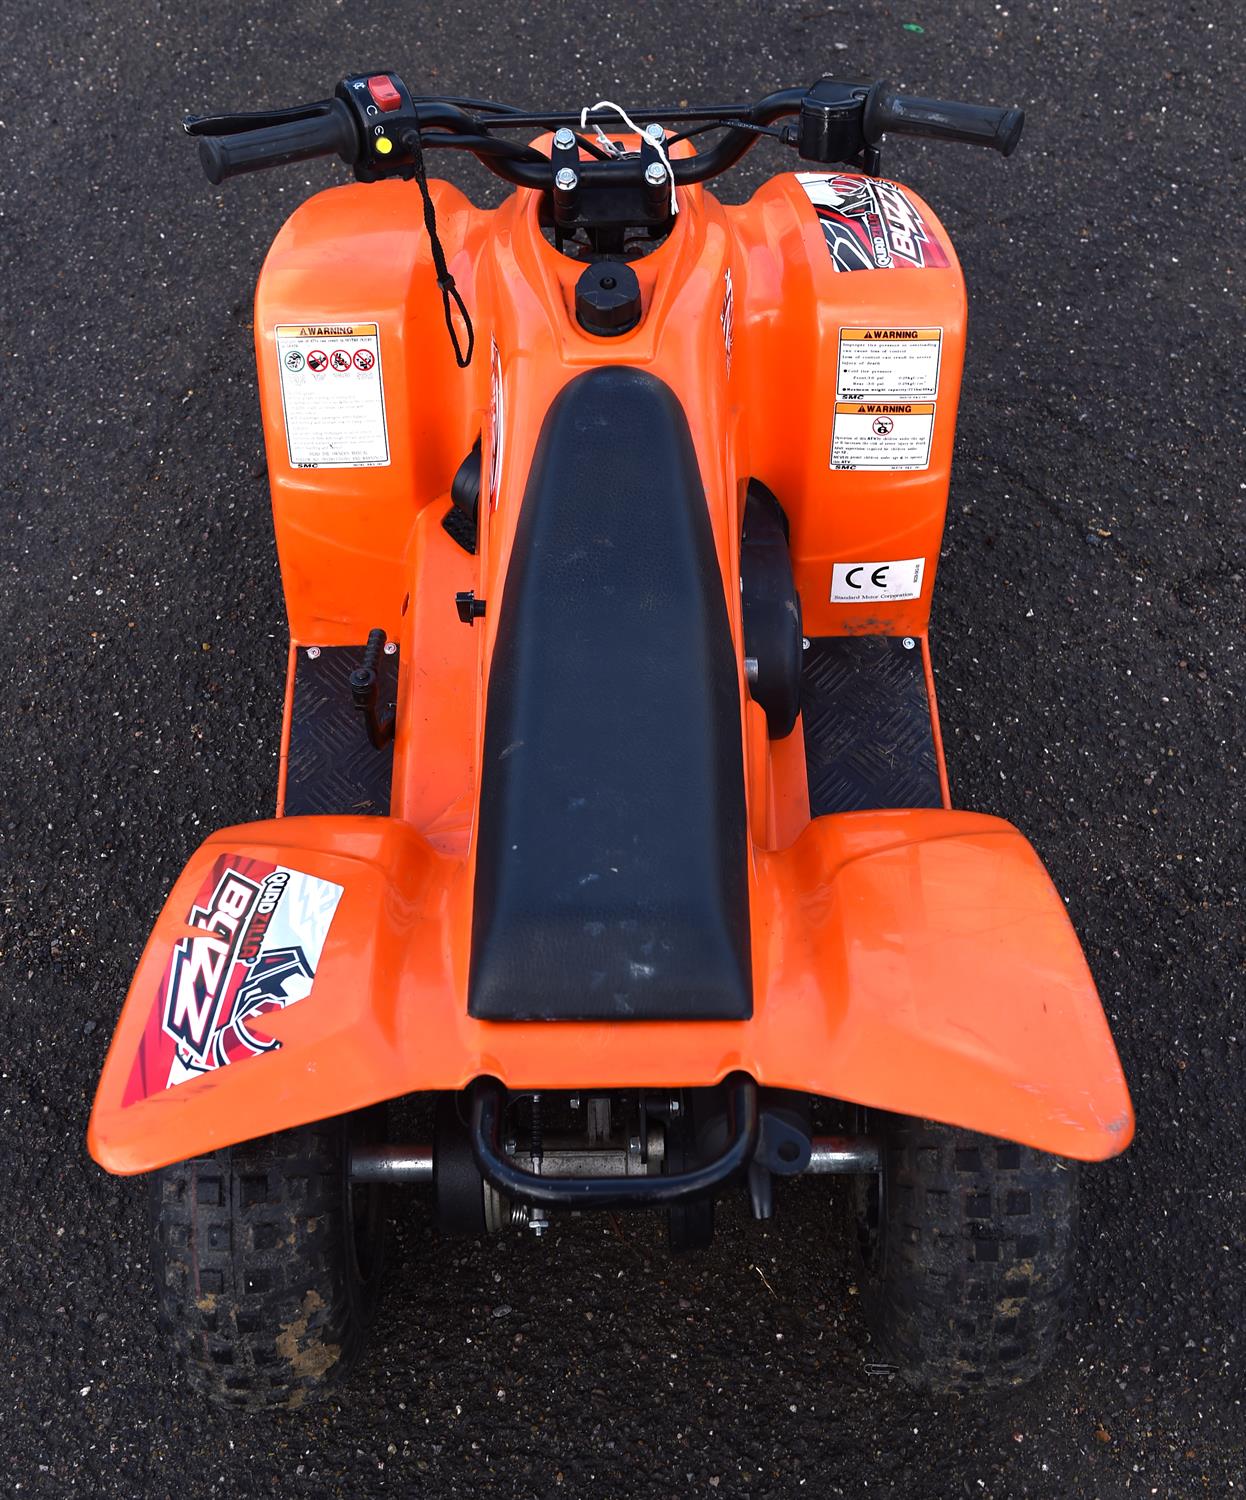 Buzz Quadzilla 50cc Quad bike. New battery fitted. Starts and runs well. A great first quad bike - Image 7 of 7